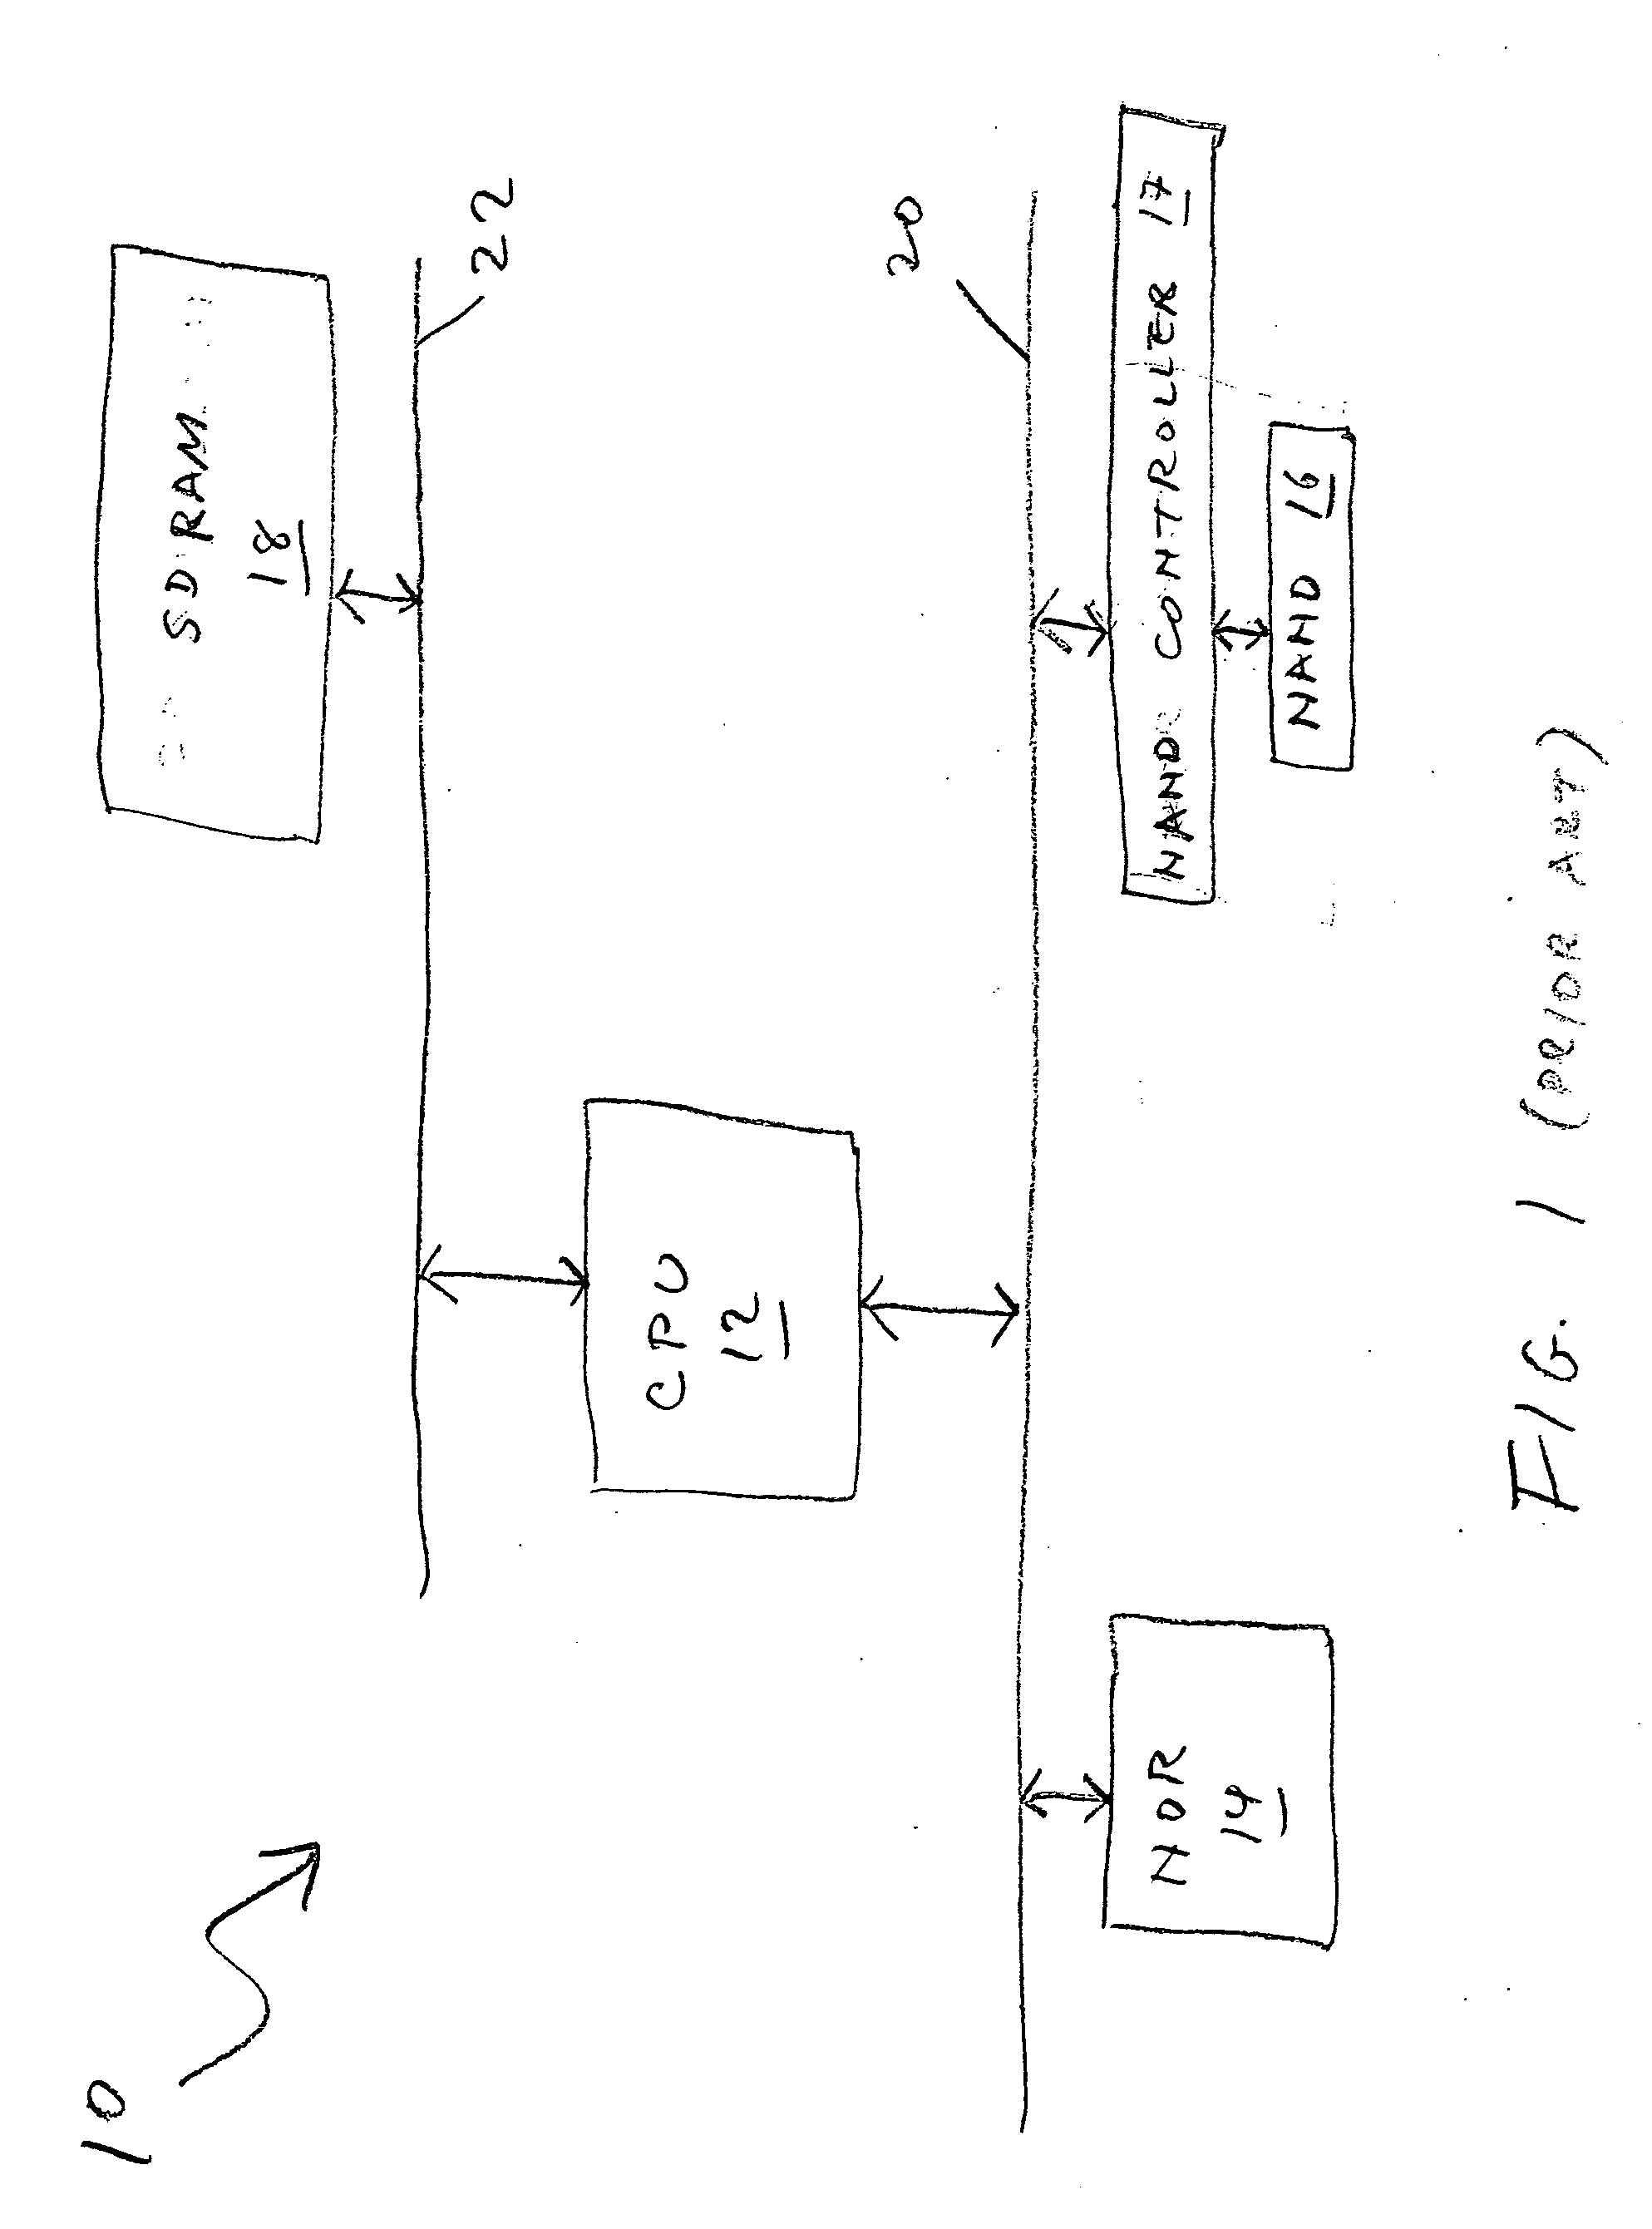 SDRAM memory device with an embedded NAND flash controller